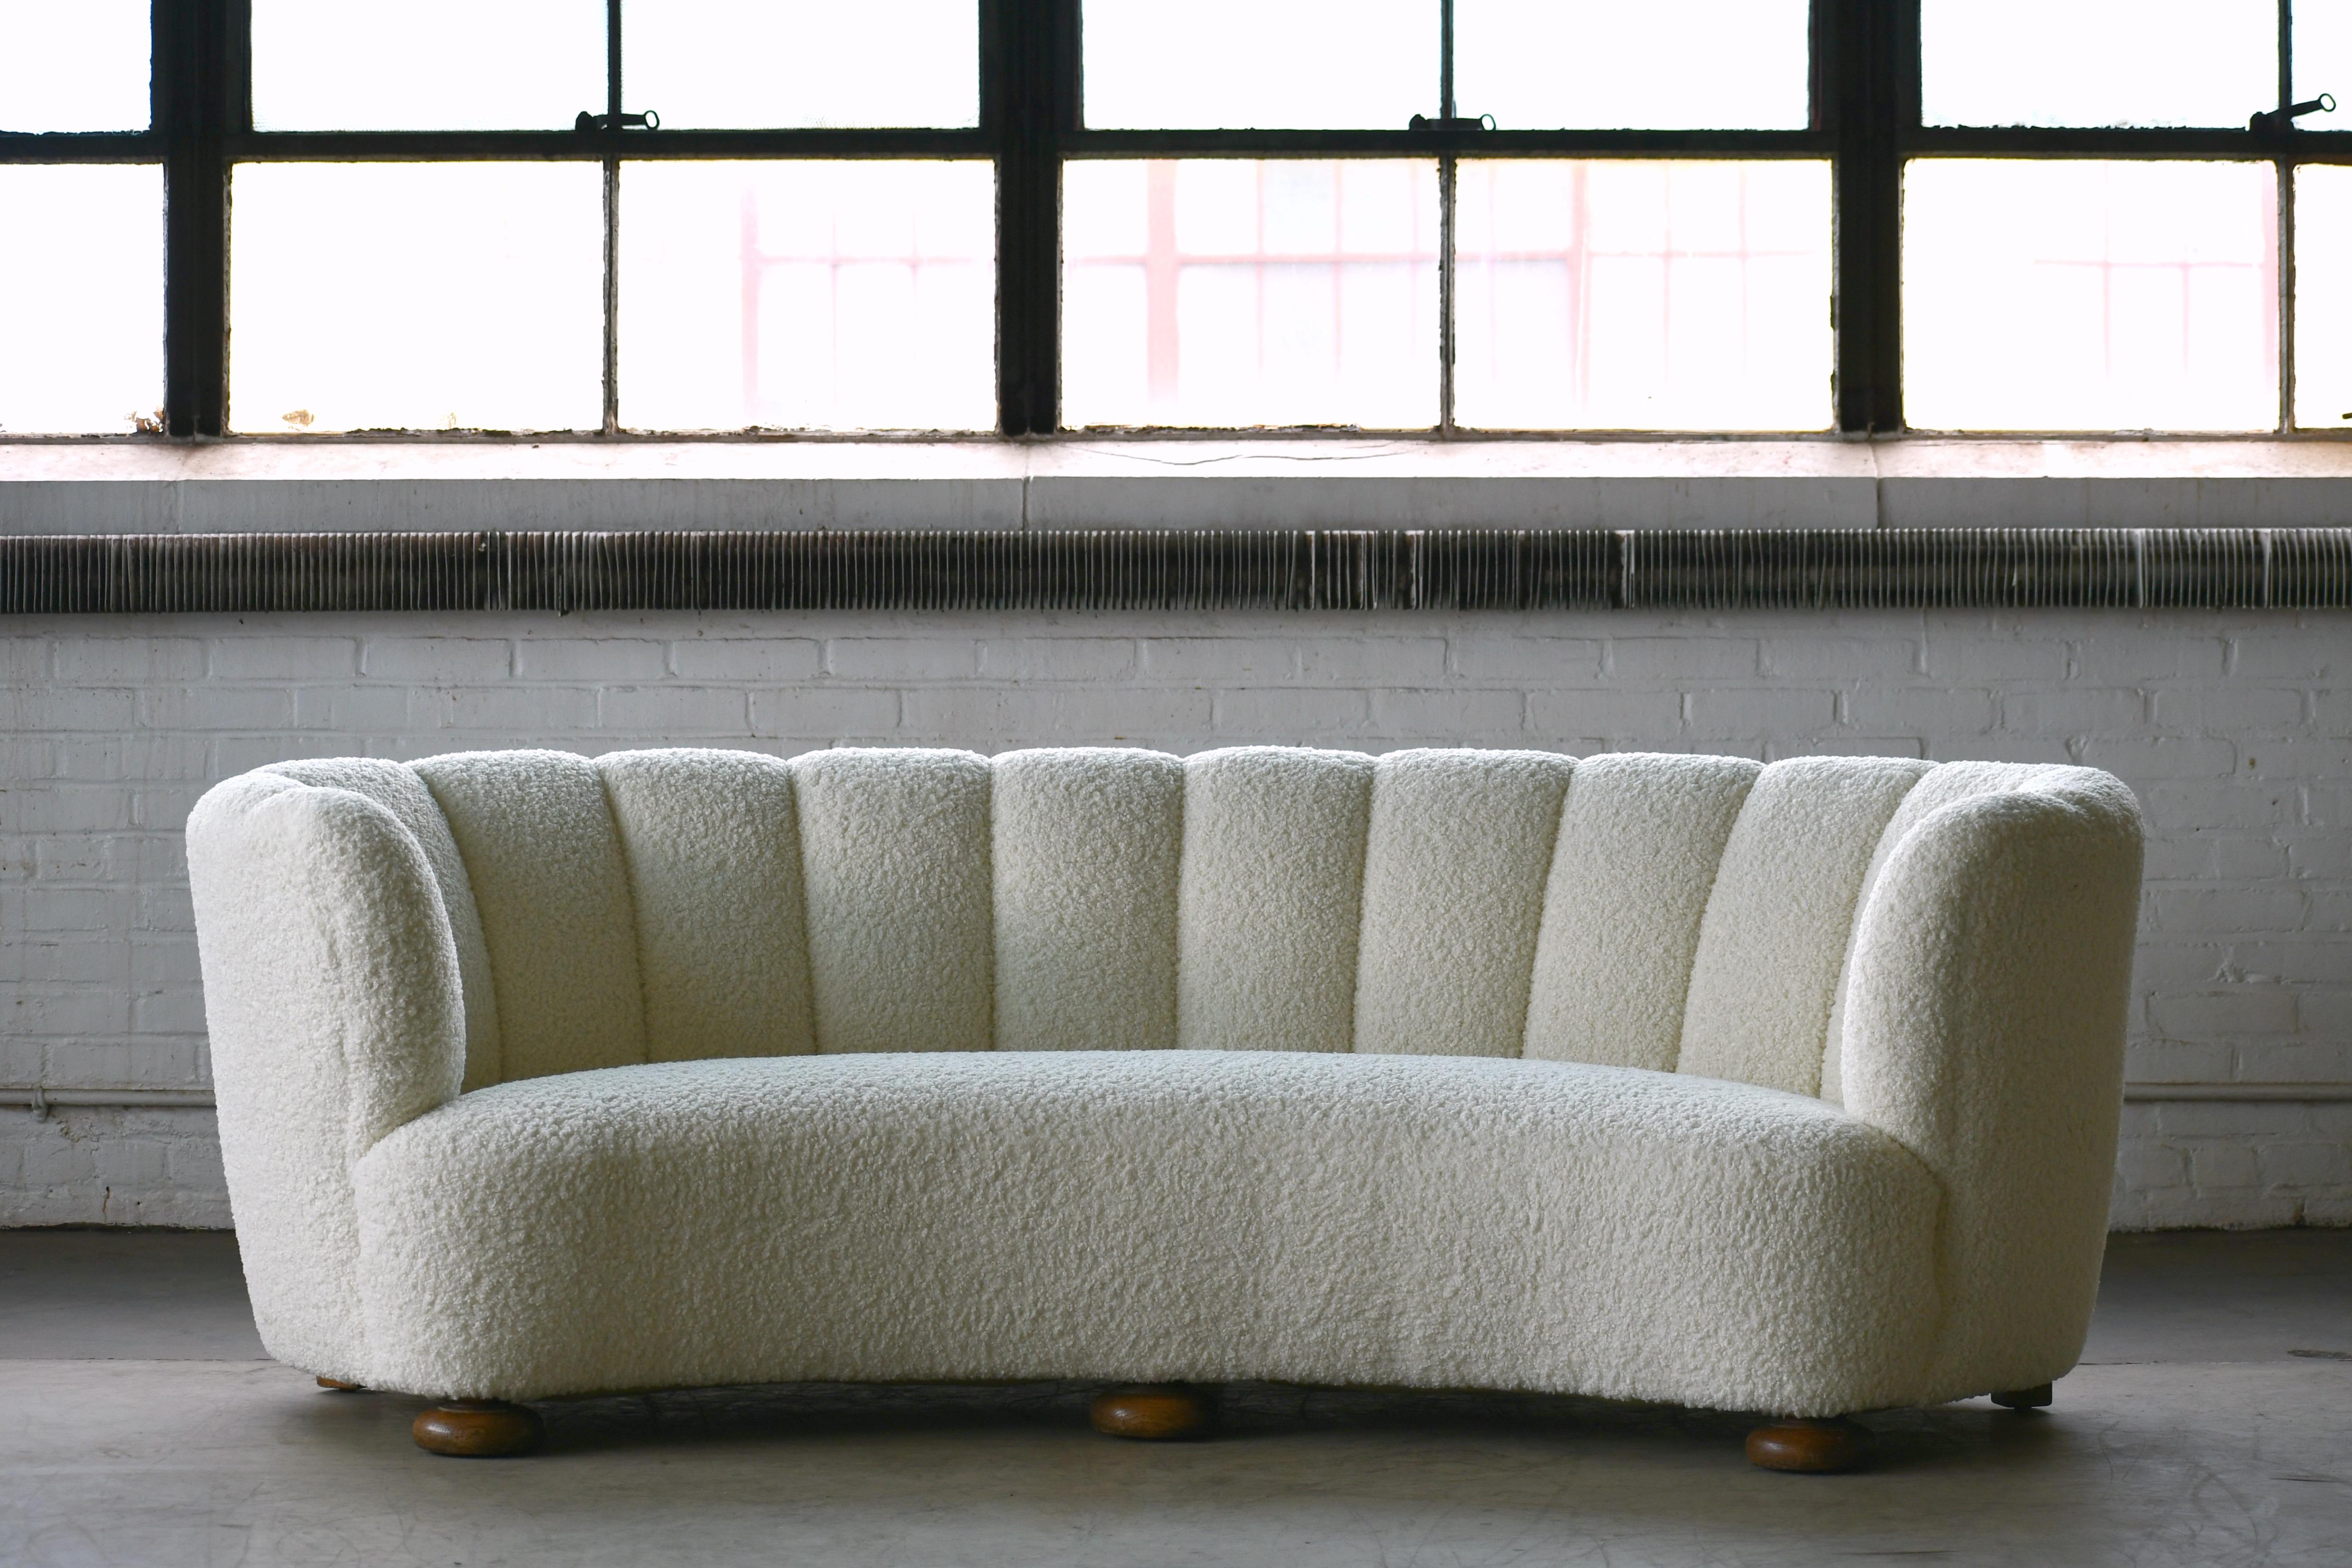 Viggo Boesen style banana shaped or curved sofa made in Denmark, circa 1940. This sofa will make strong statement in any room. Beautiful round voluptuous lines and with large block legs. Fully refurbished and newly upholstered a soft elegant bouclé